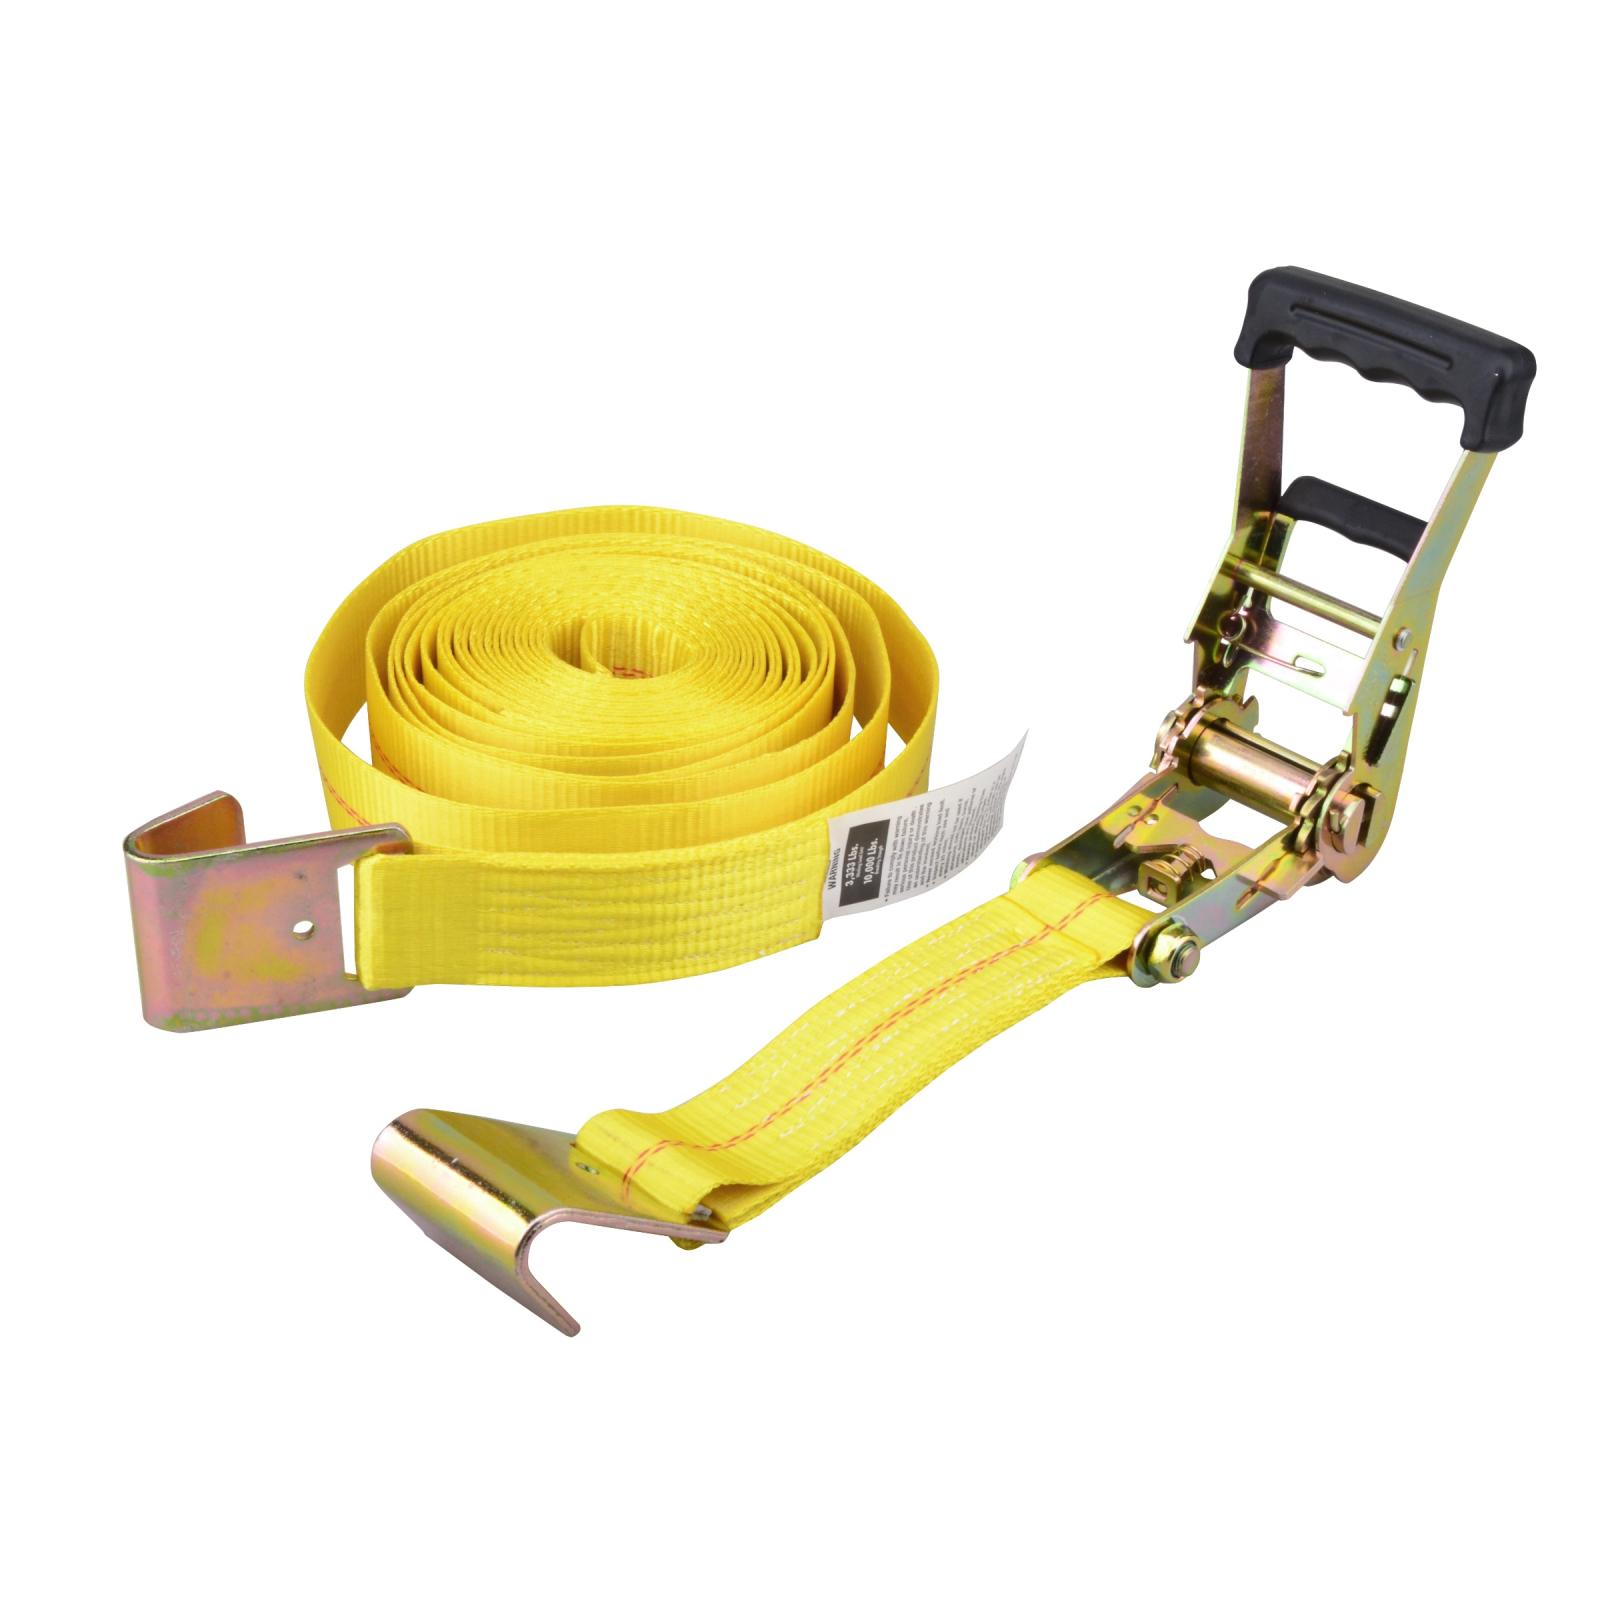 Erickson 2" x 27' 10,000 lbs Ratcheting Tie-Down Strap with Flat Hooks